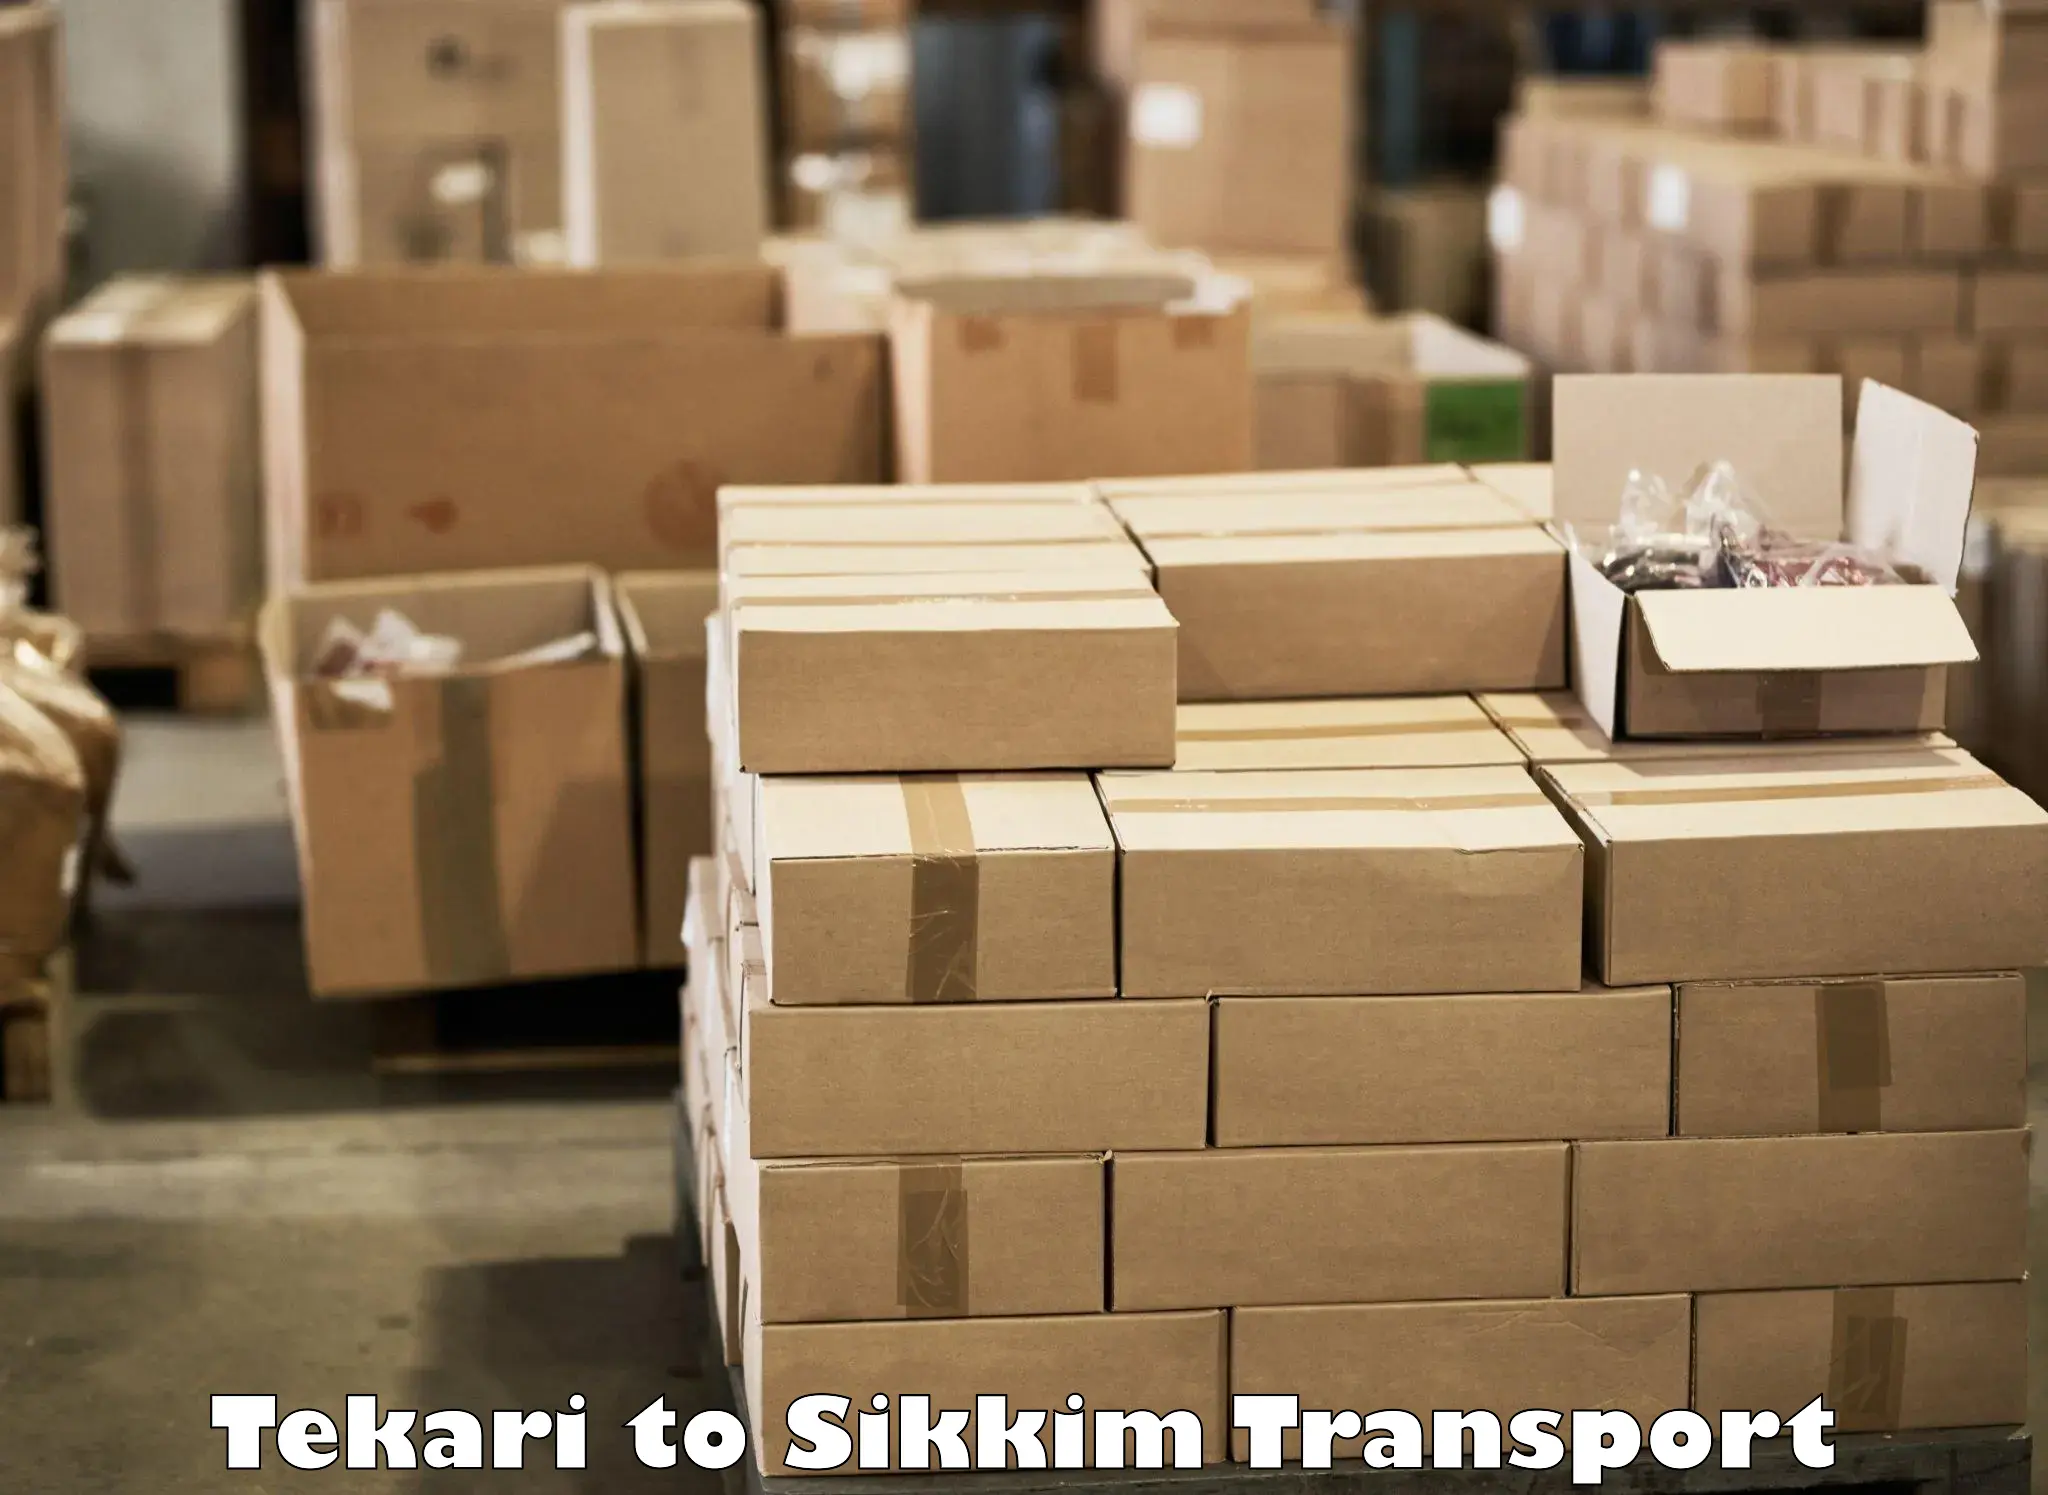 Vehicle courier services Tekari to Pelling